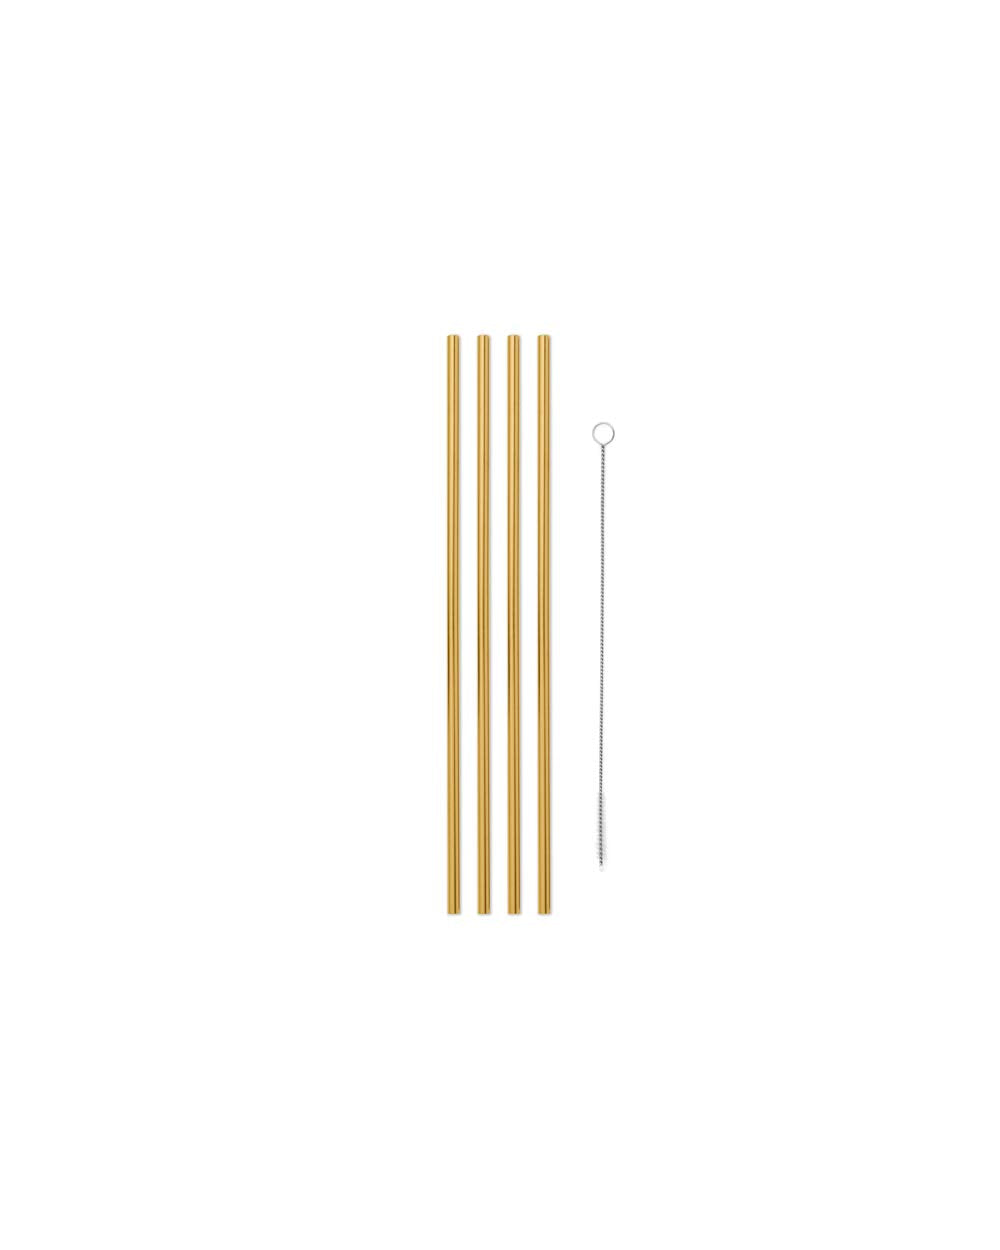 W&P Porter Stainless Steel Metal With Cleaner Brusher Straws Color Gold